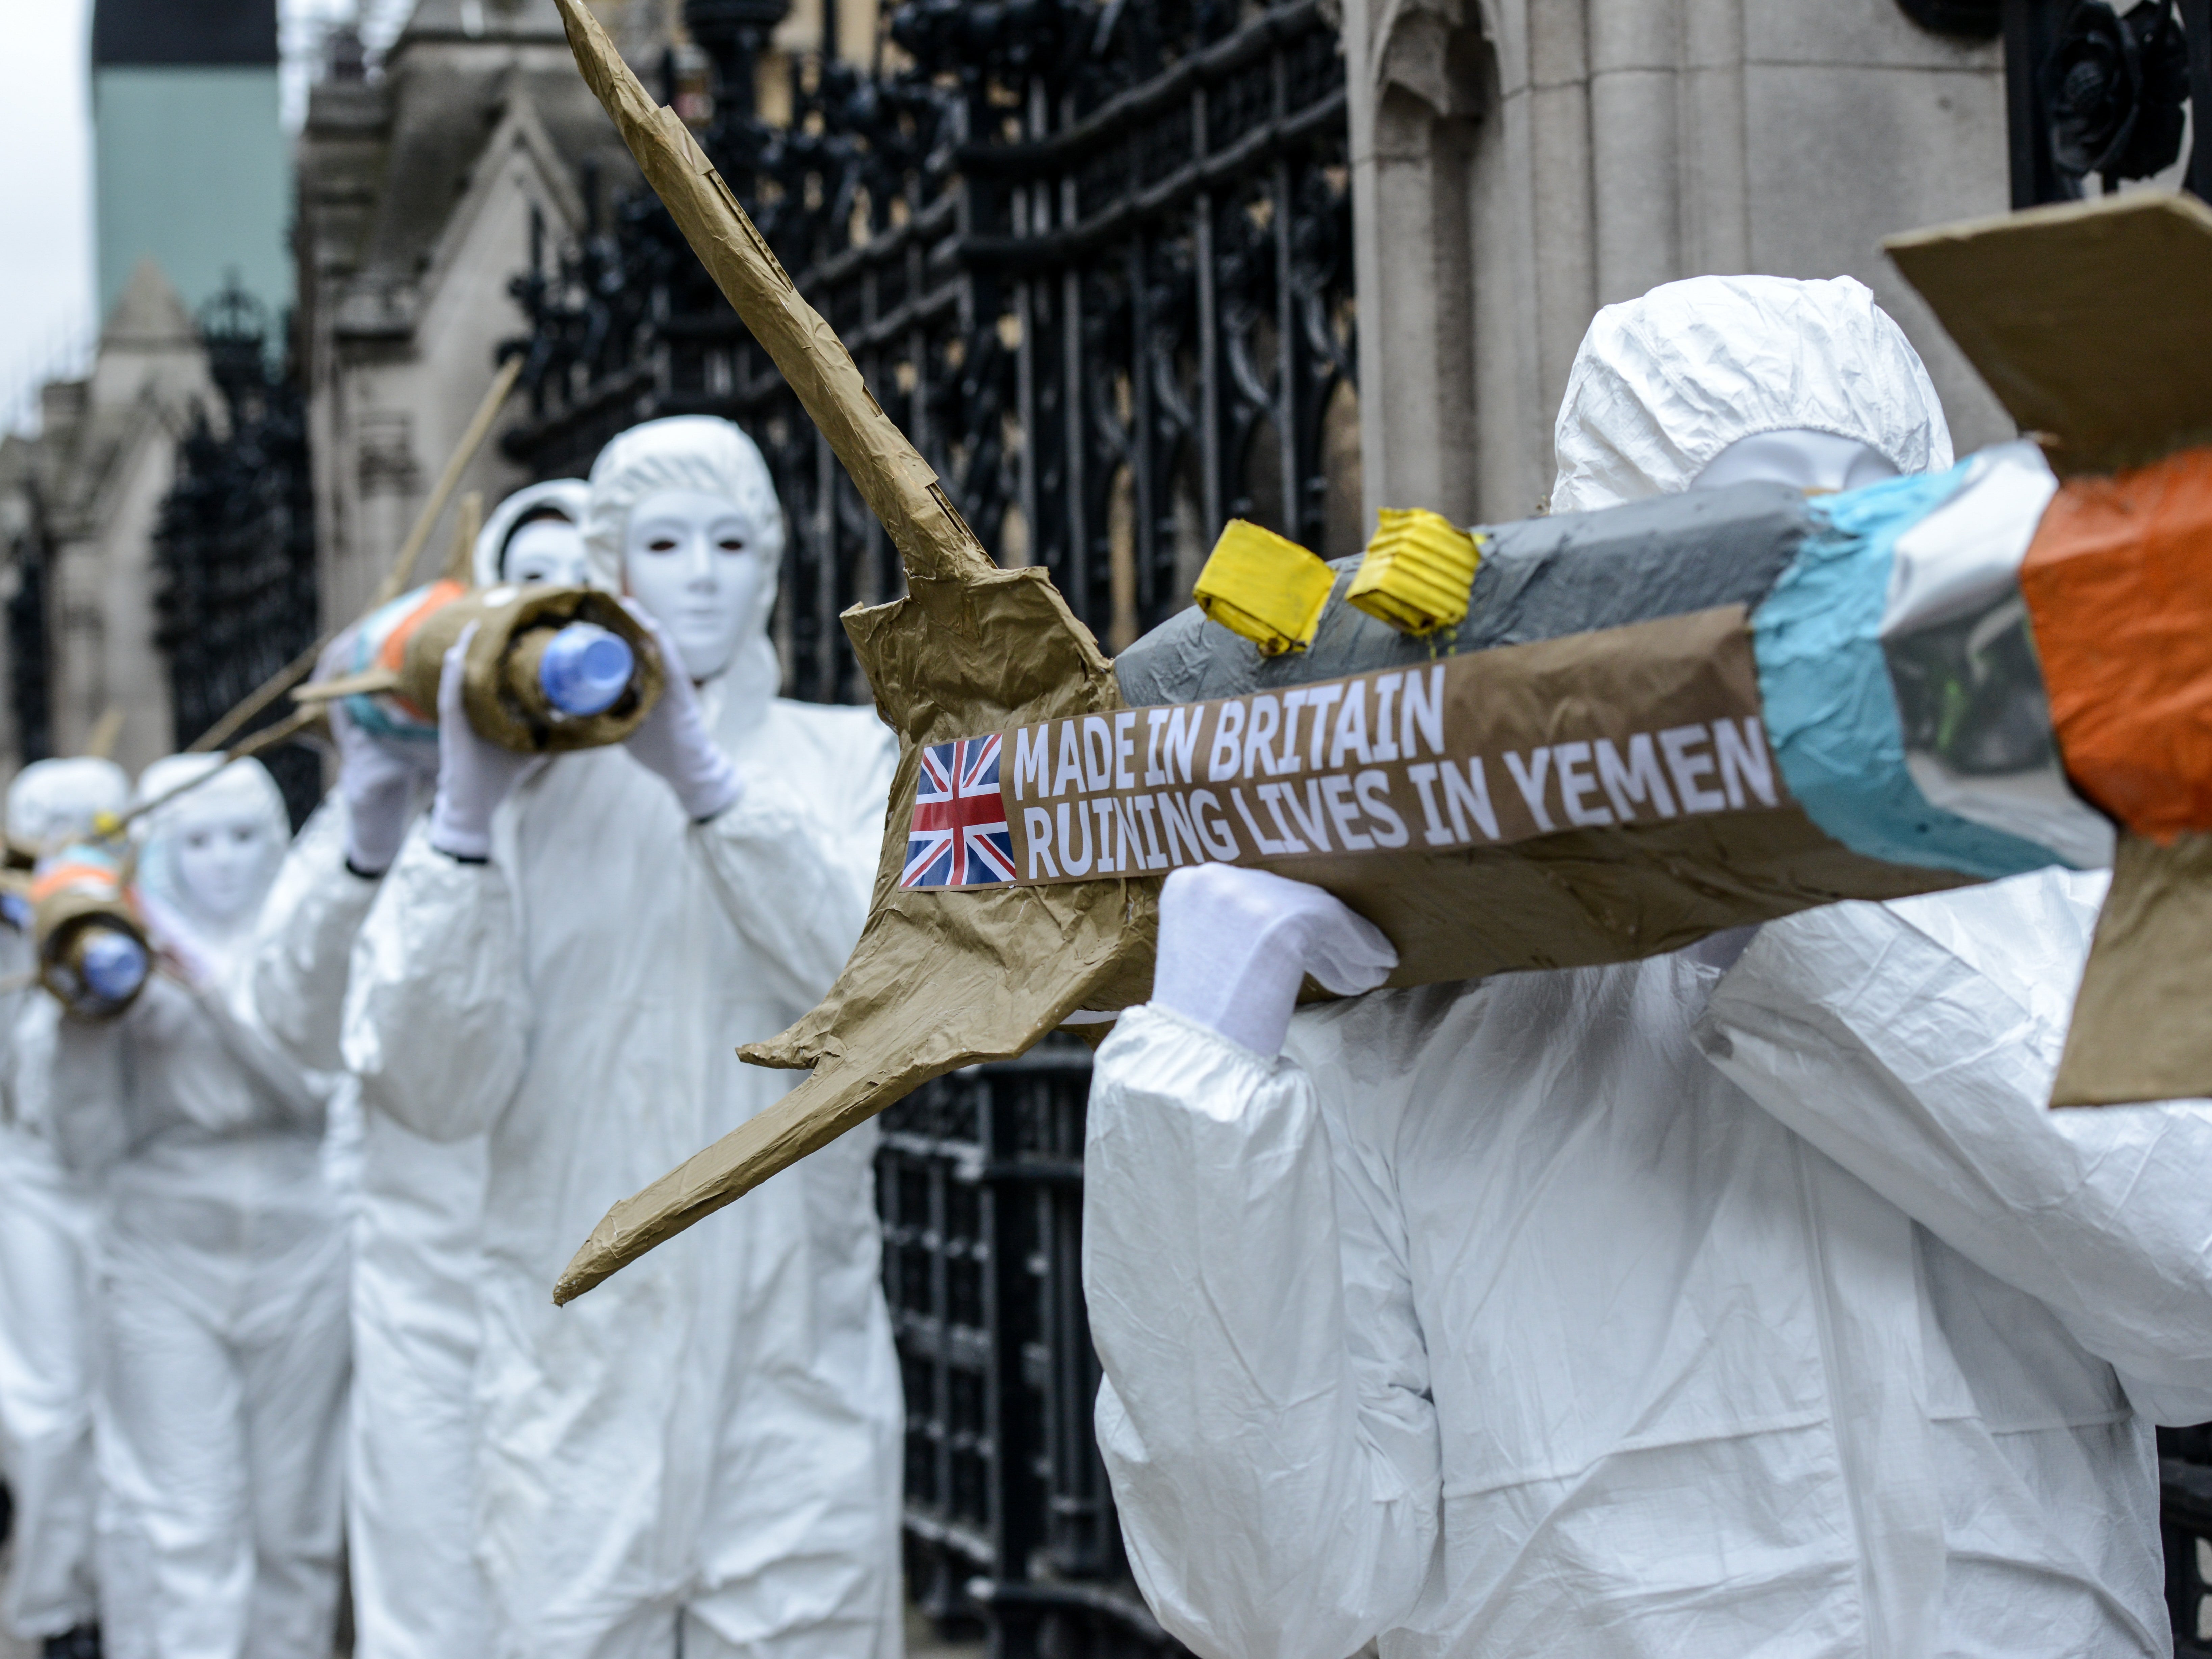 Amnesty International activists march with homemade replica missiles during a protest over UK arms sales to Saudi Arabia, 18 March 2016